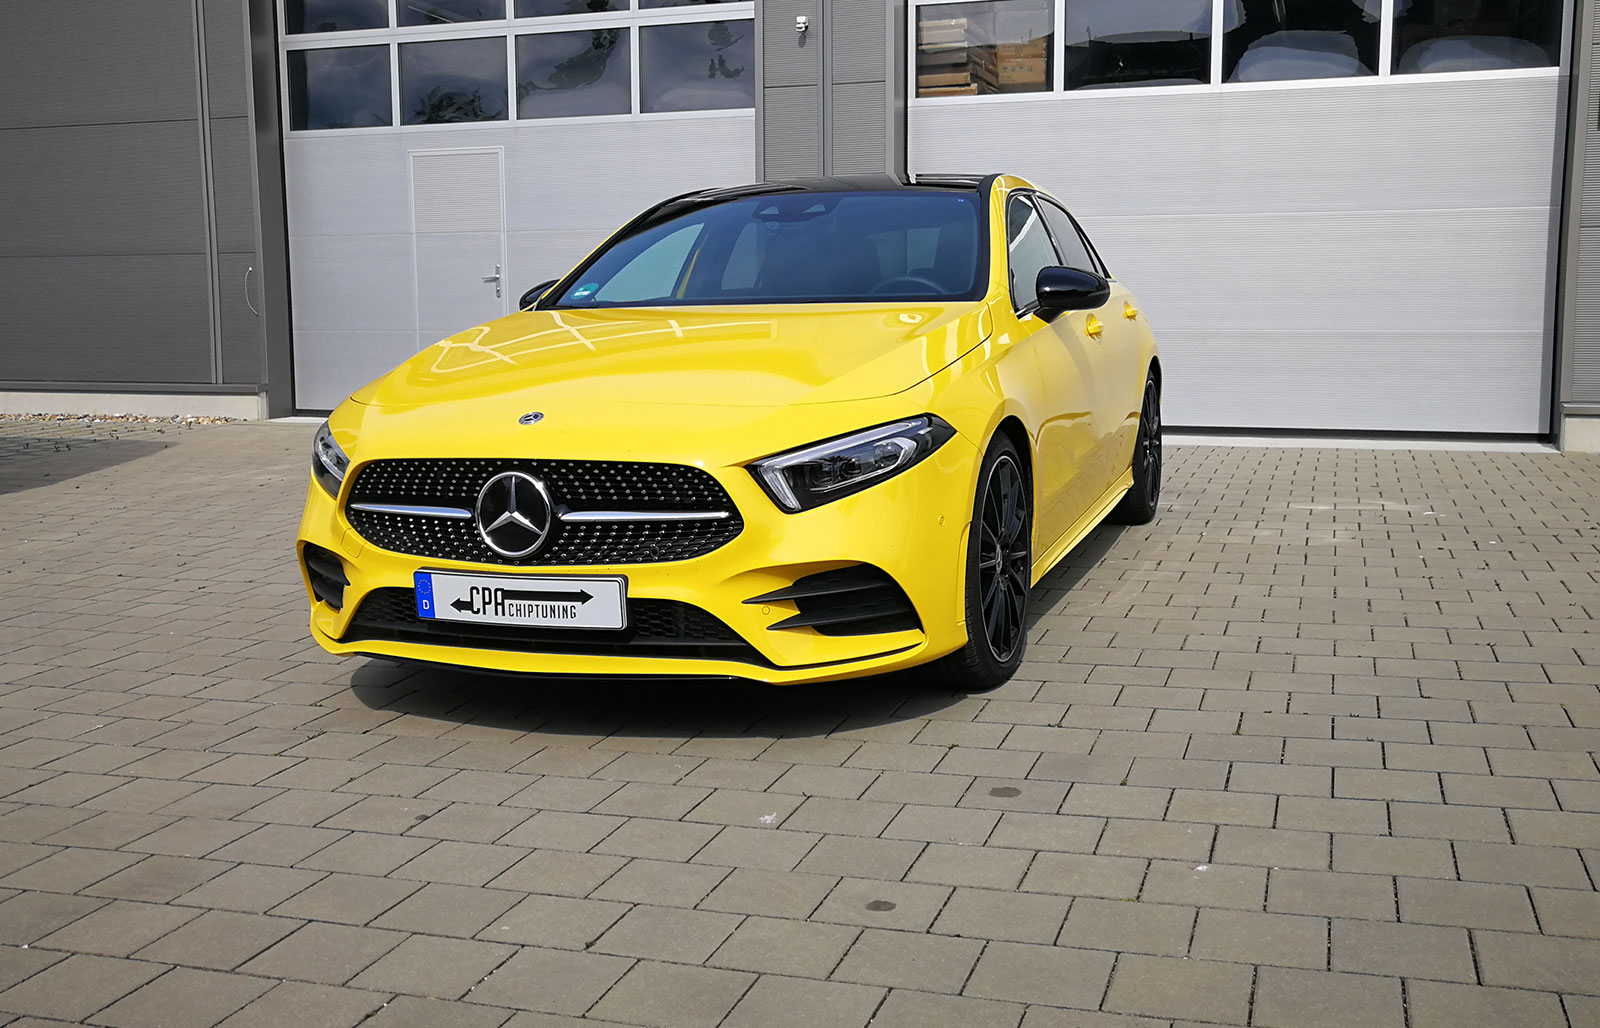 The new entry-level version at AMG, the A35 AMG